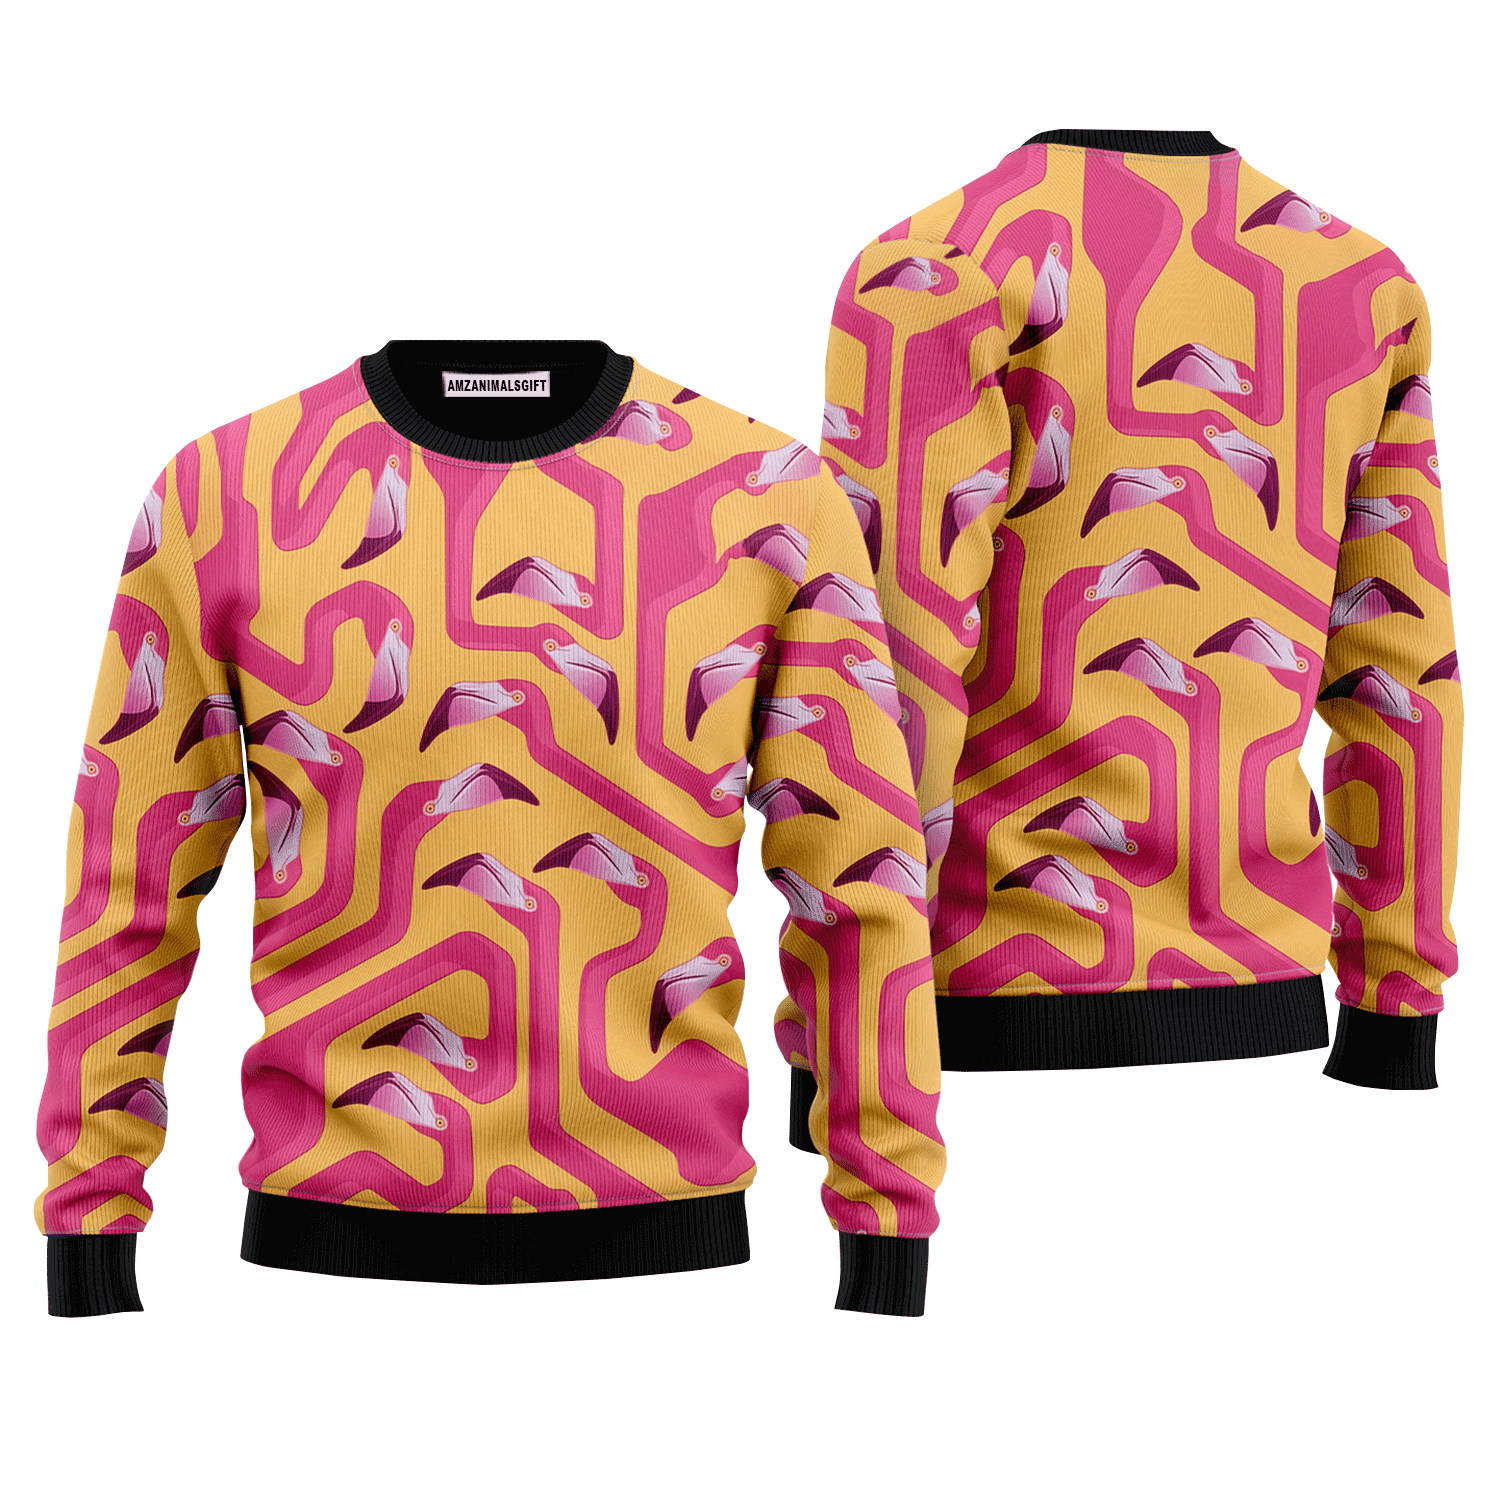 Flamingo long neck Pattern Sweater, Ugly Sweater For Men & Women, Perfect Outfit For Christmas New Year Autumn Winter